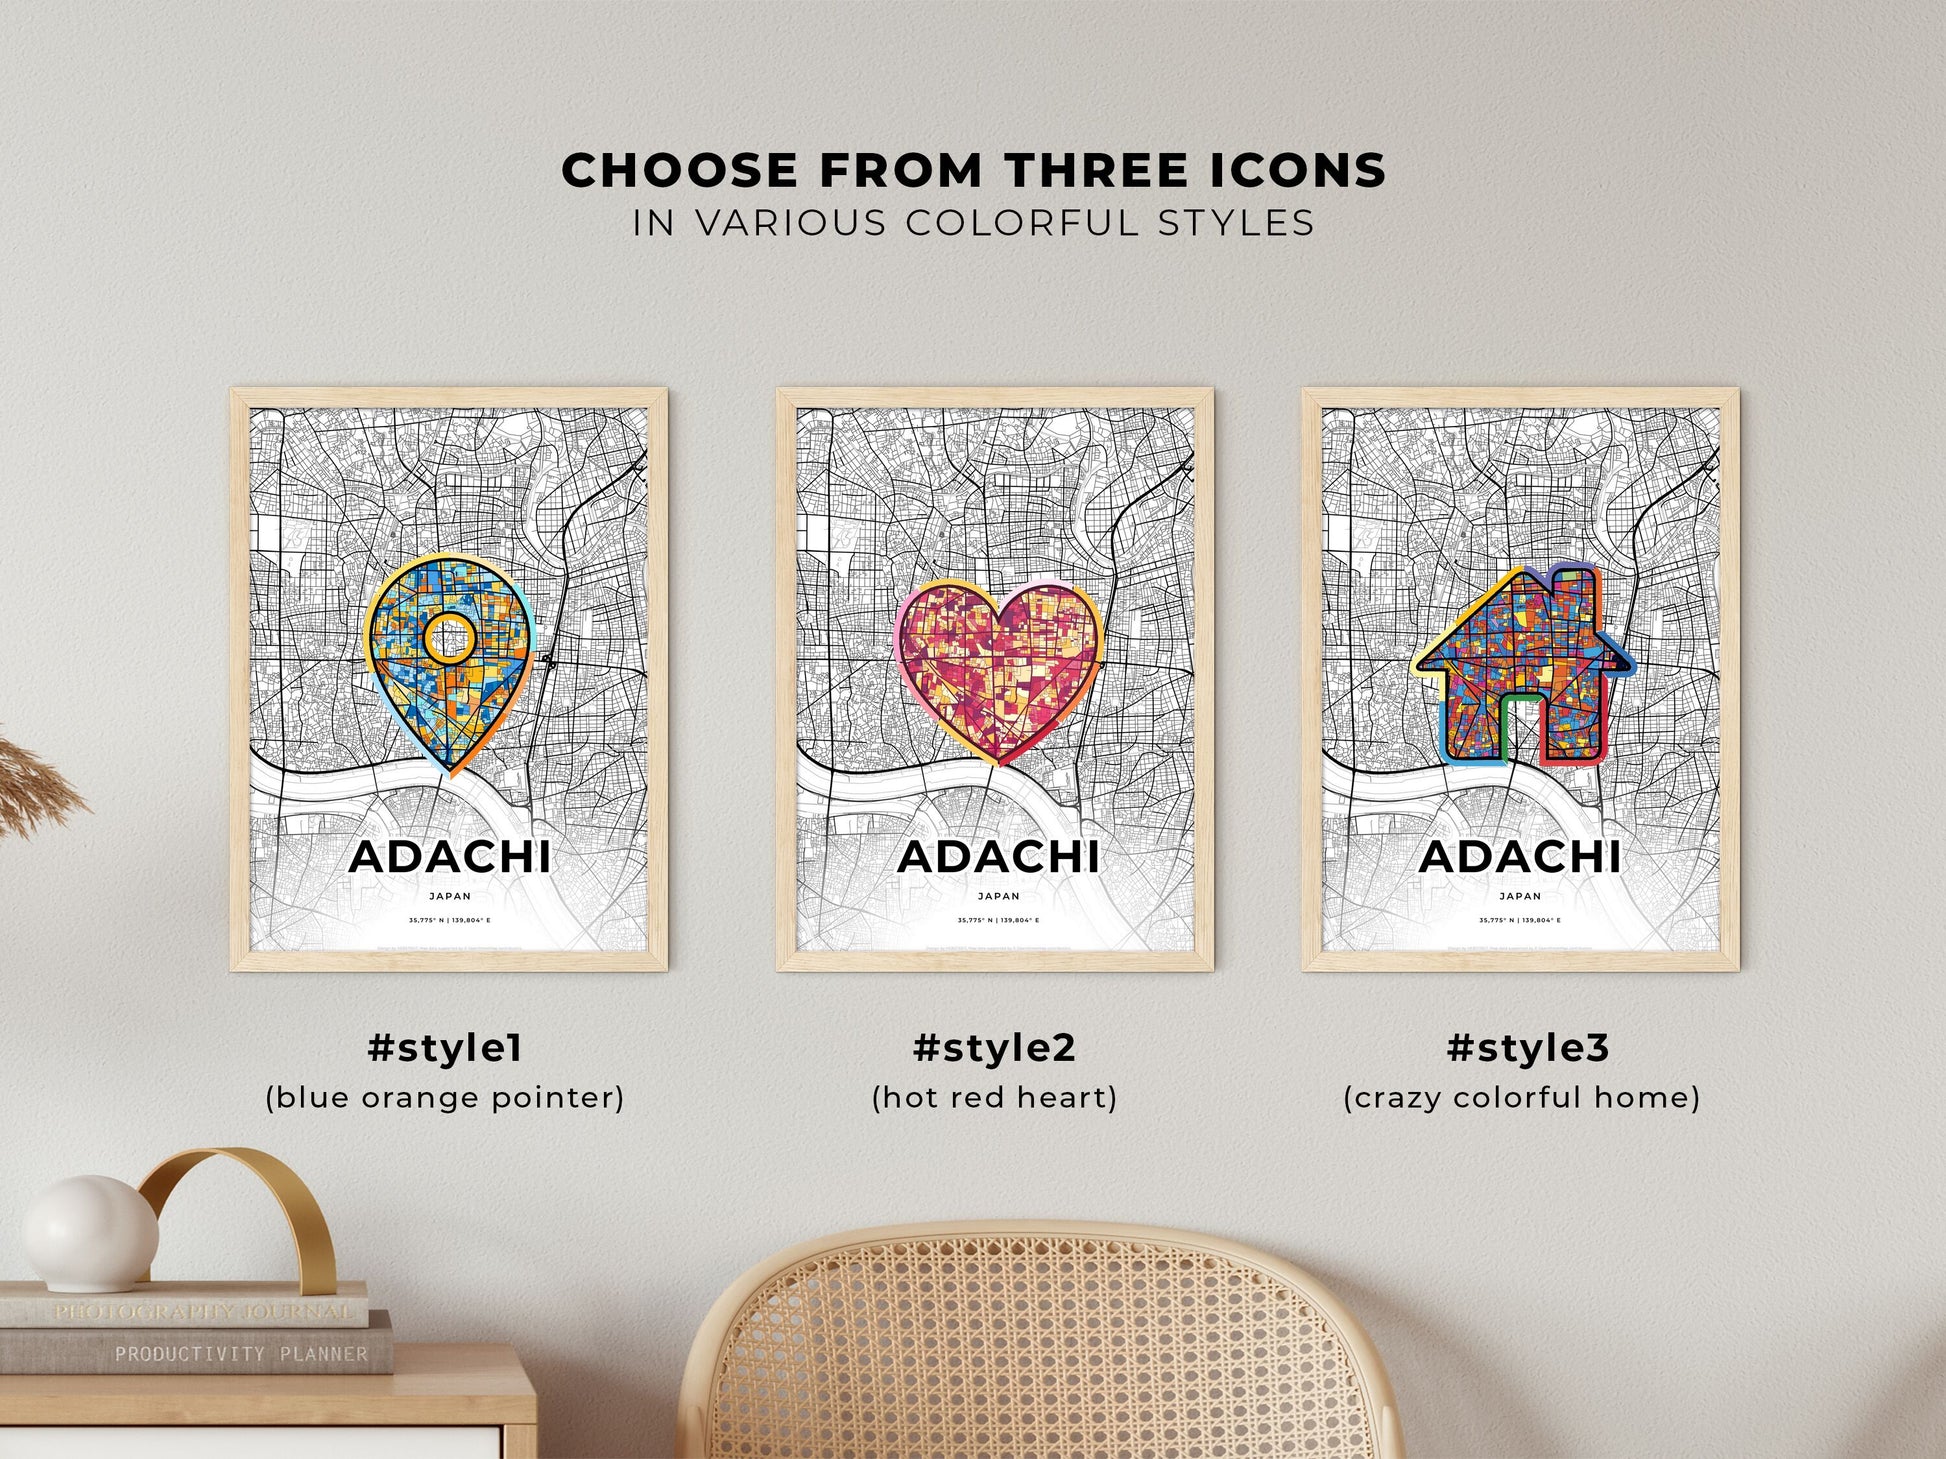 ADACHI JAPAN minimal art map with a colorful icon. Where it all began, Couple map gift.